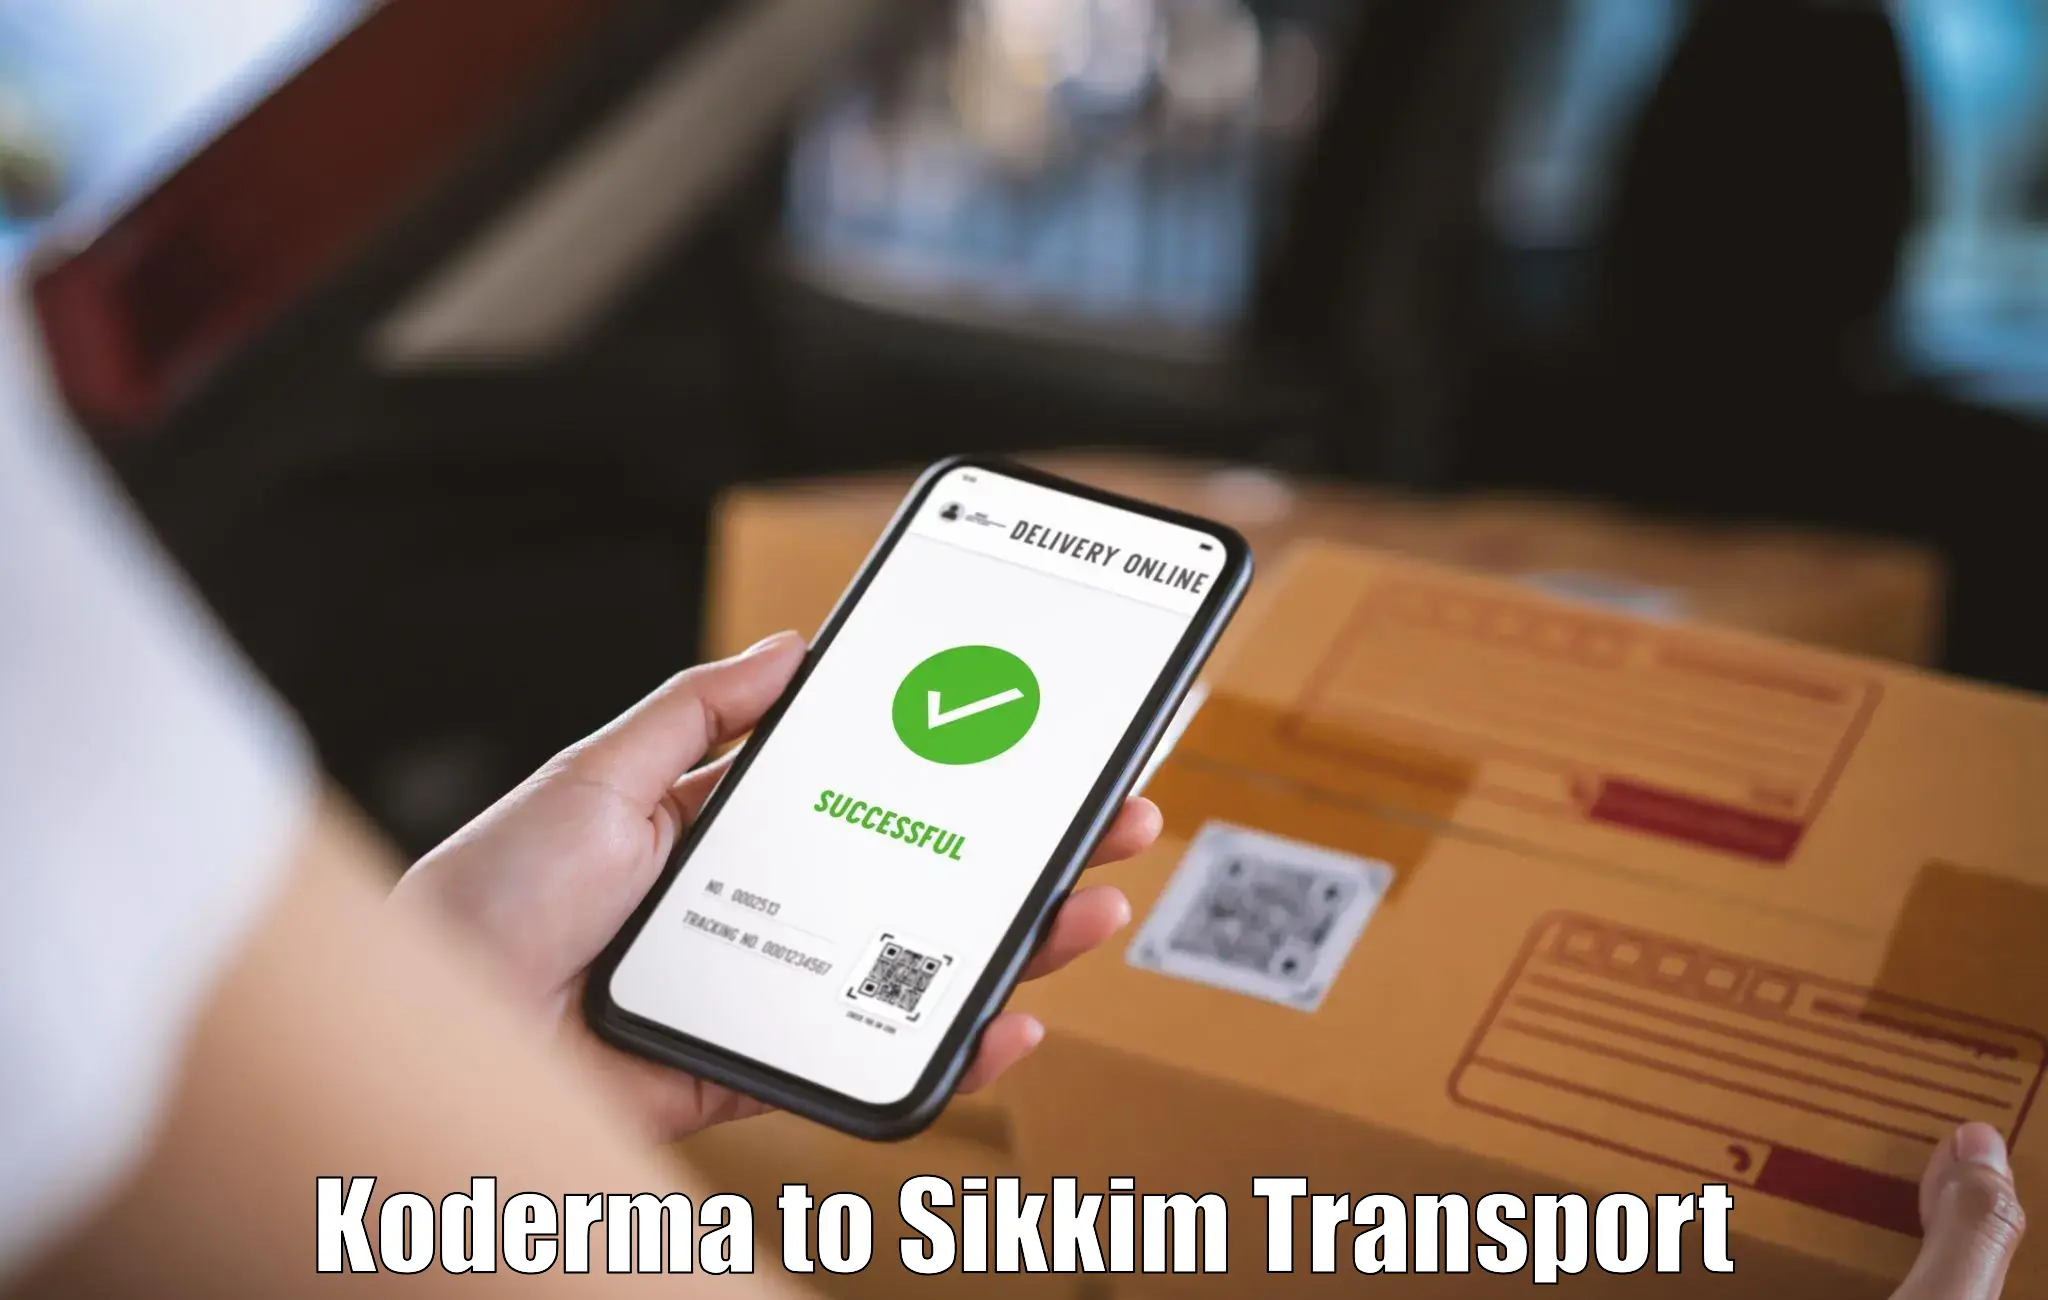 Daily transport service Koderma to East Sikkim